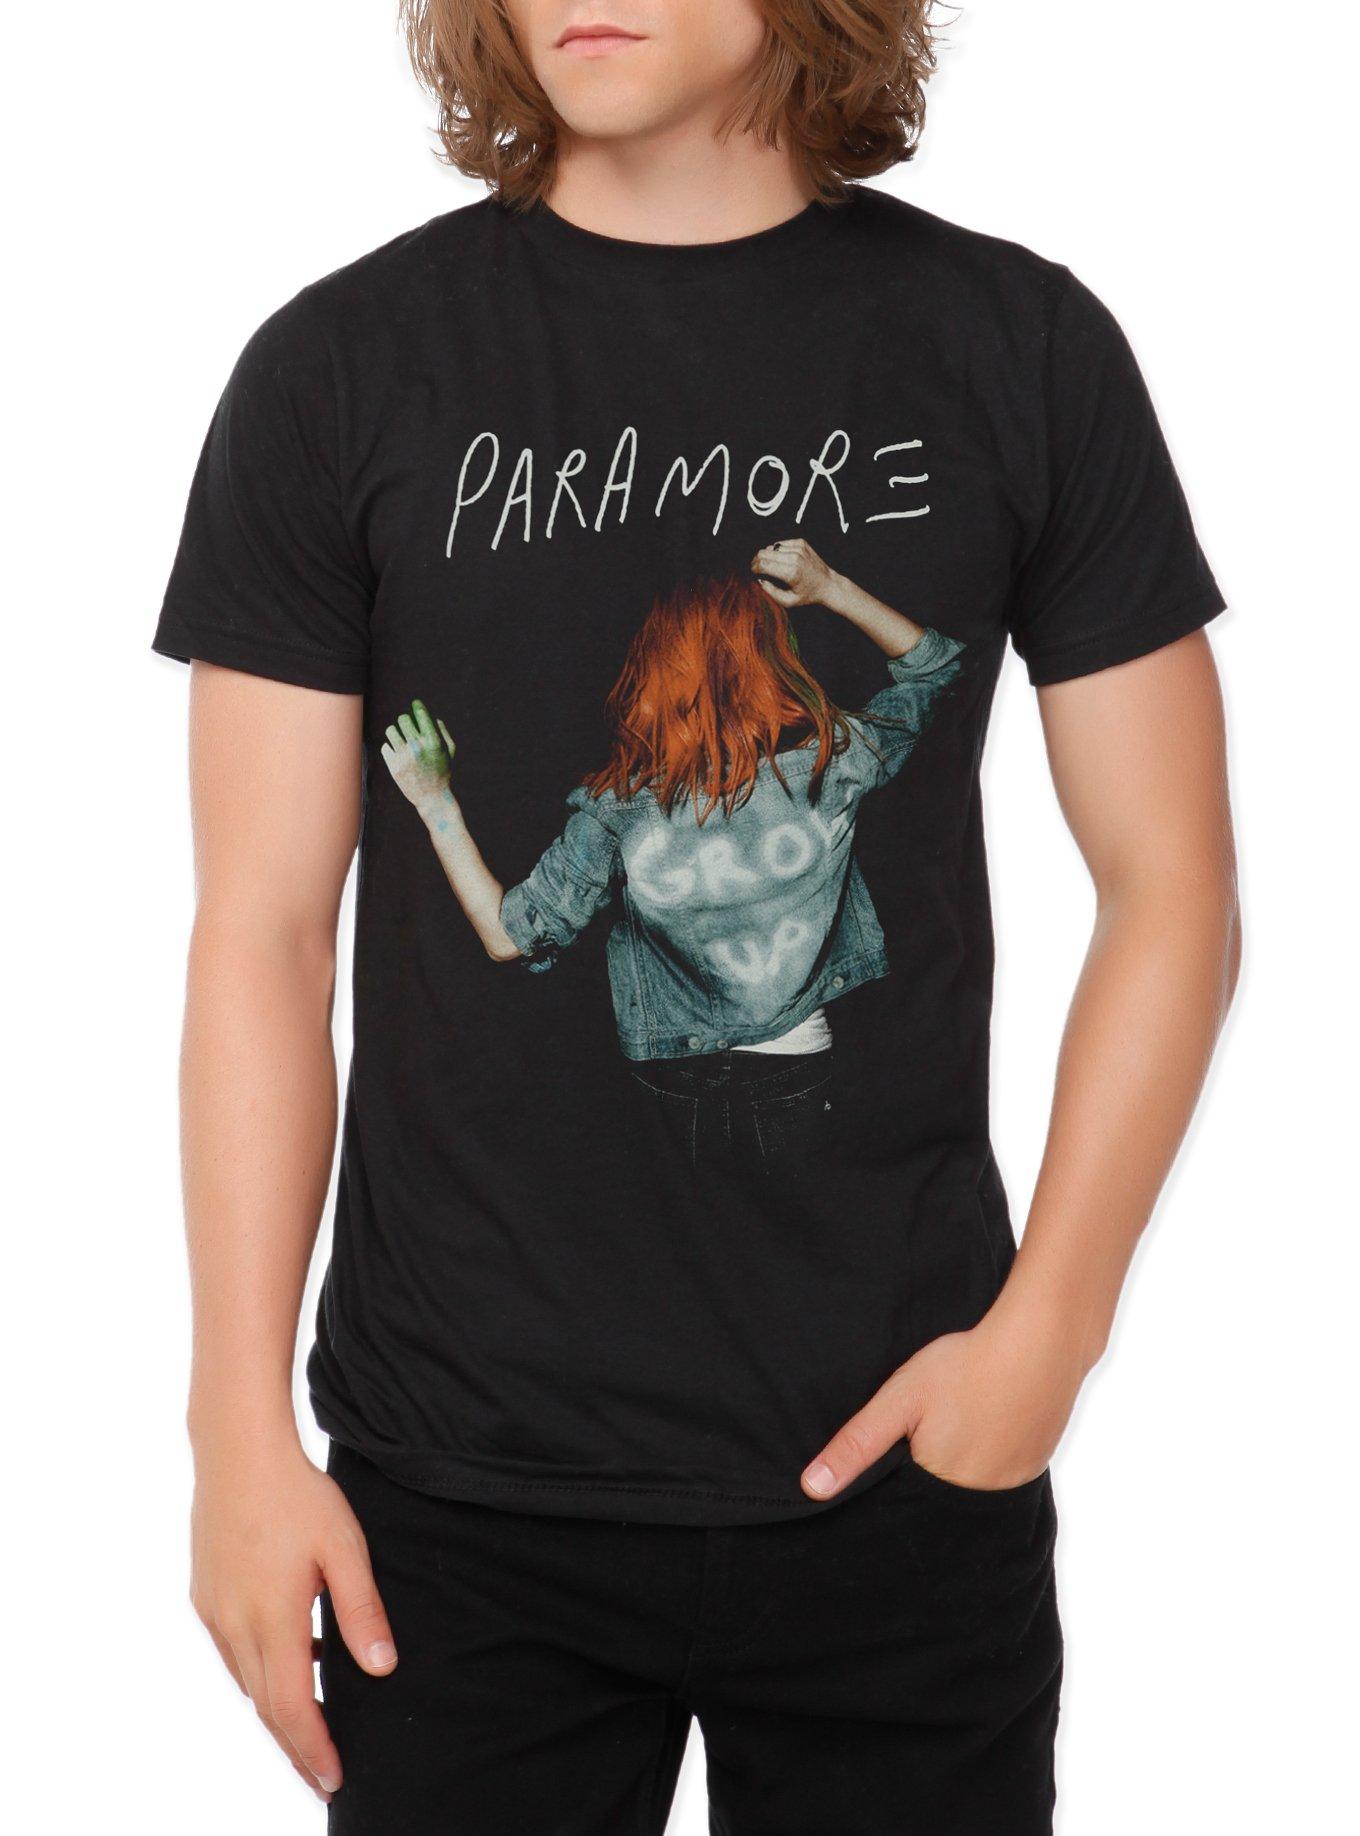 Paramore Merch Store - Officially Licensed Merchandise